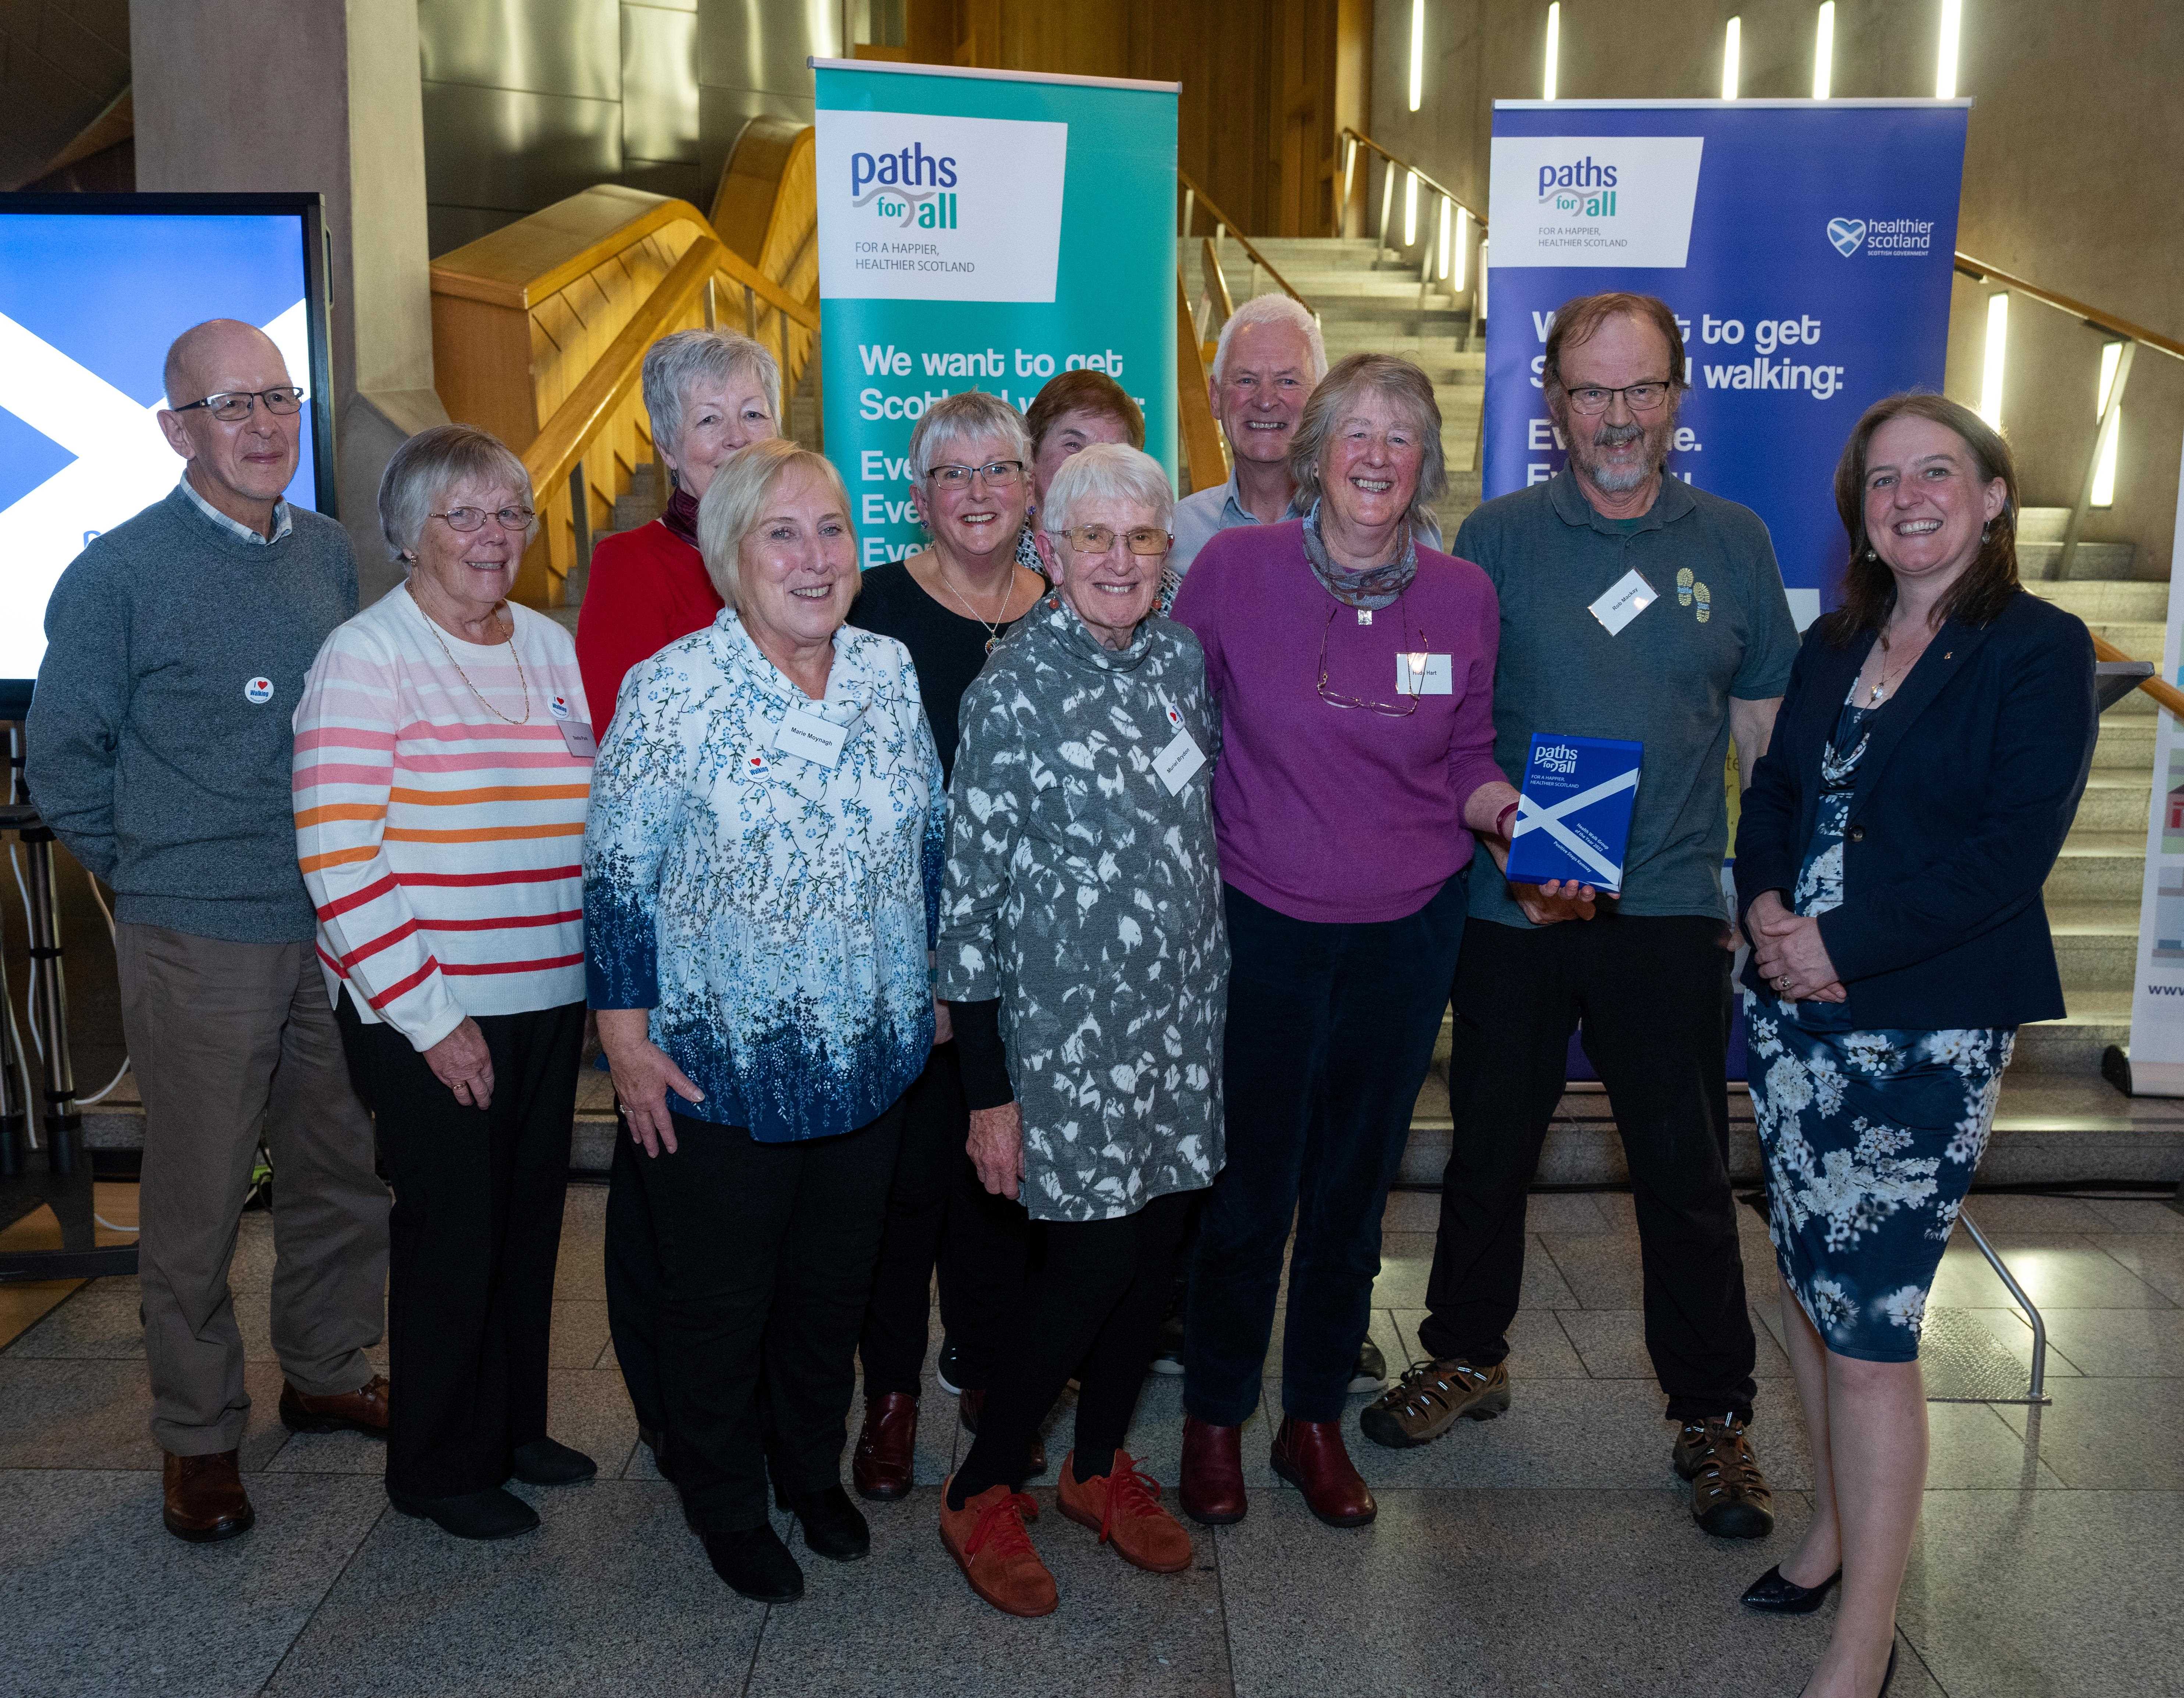 Positive Steps Kemnay winning their 'Health Walk Group of the Year' award.